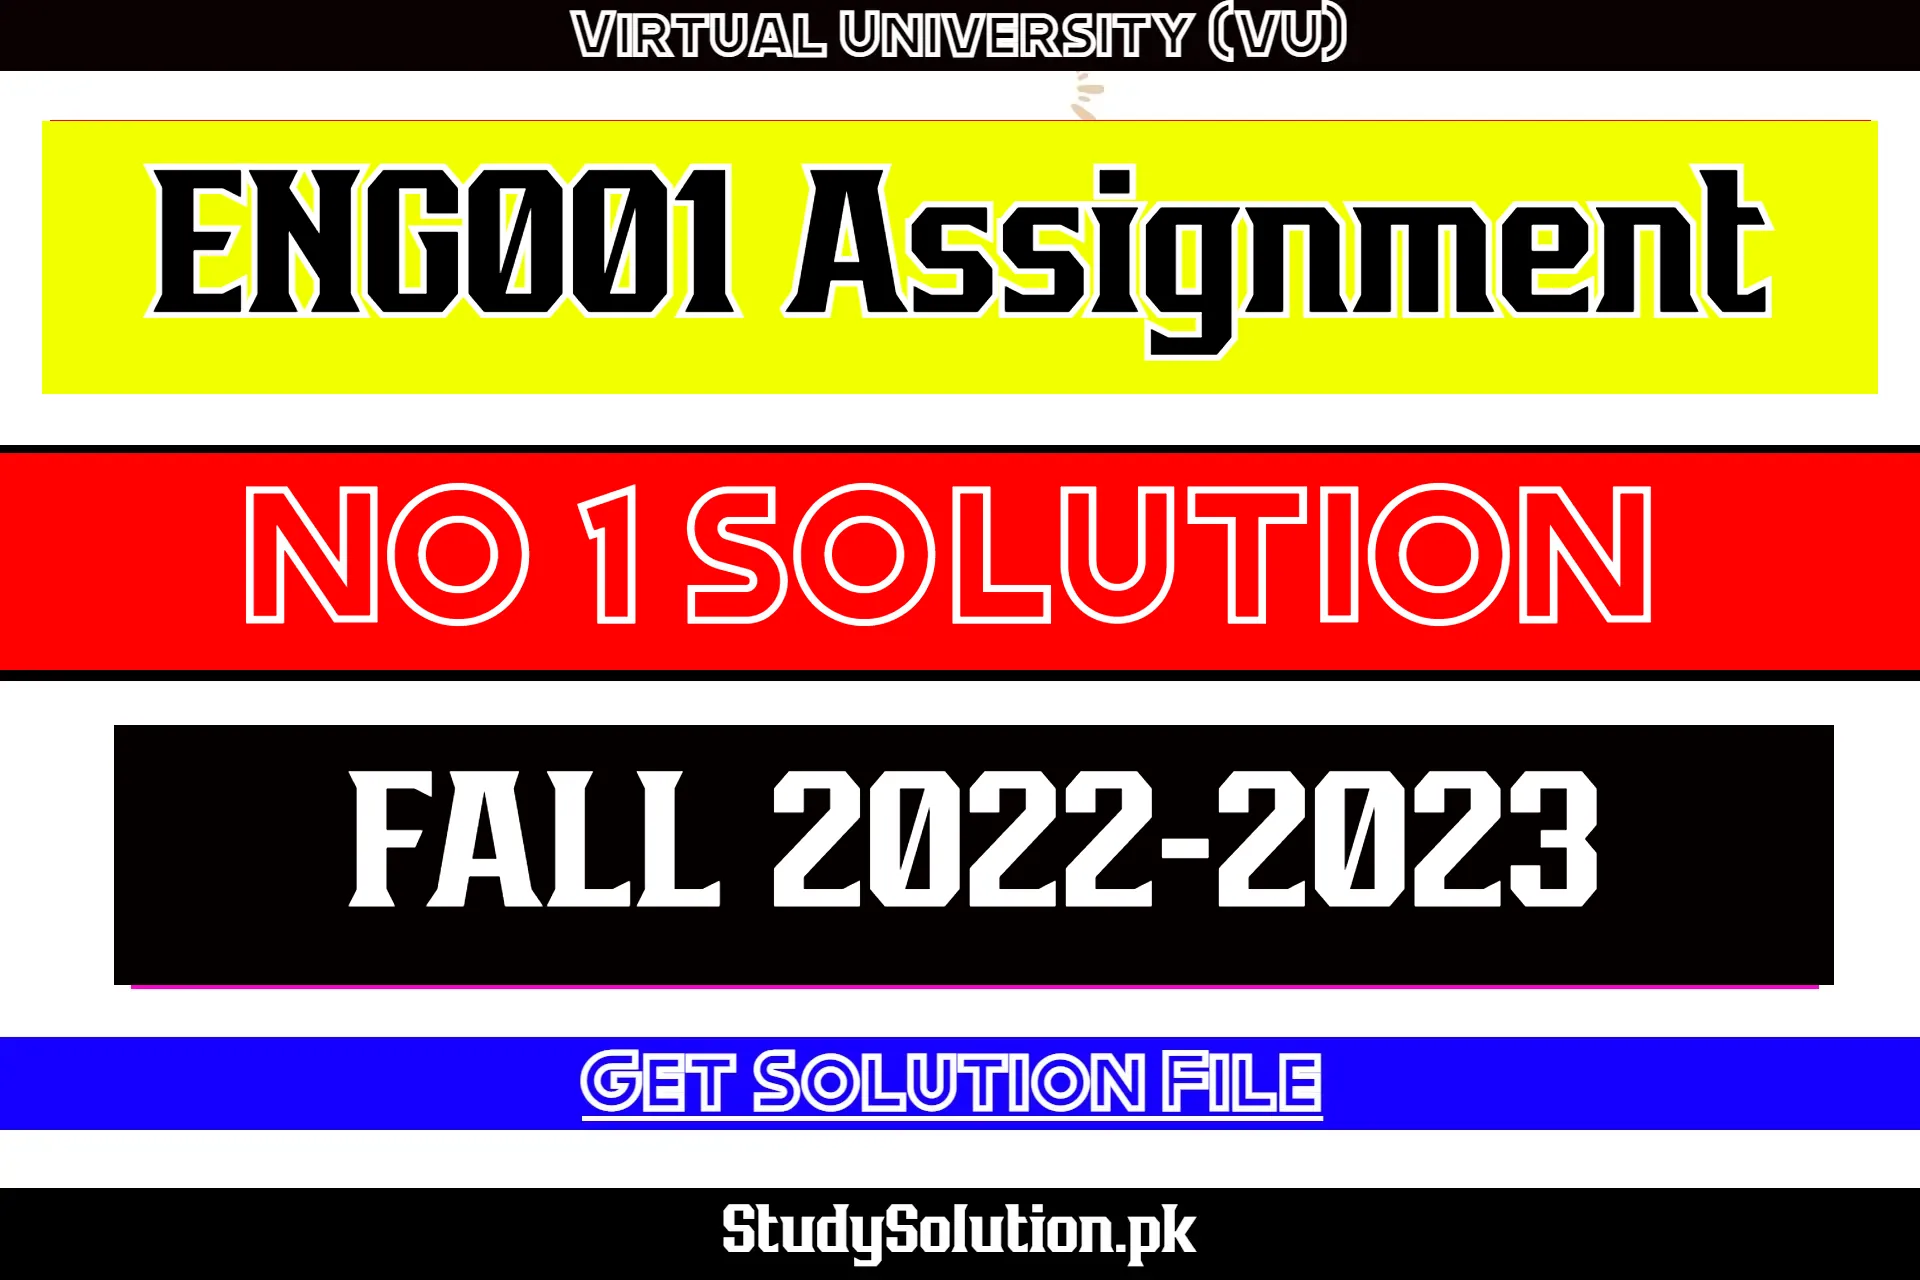 ENG001 Assignment No 1 Solution Fall 2022